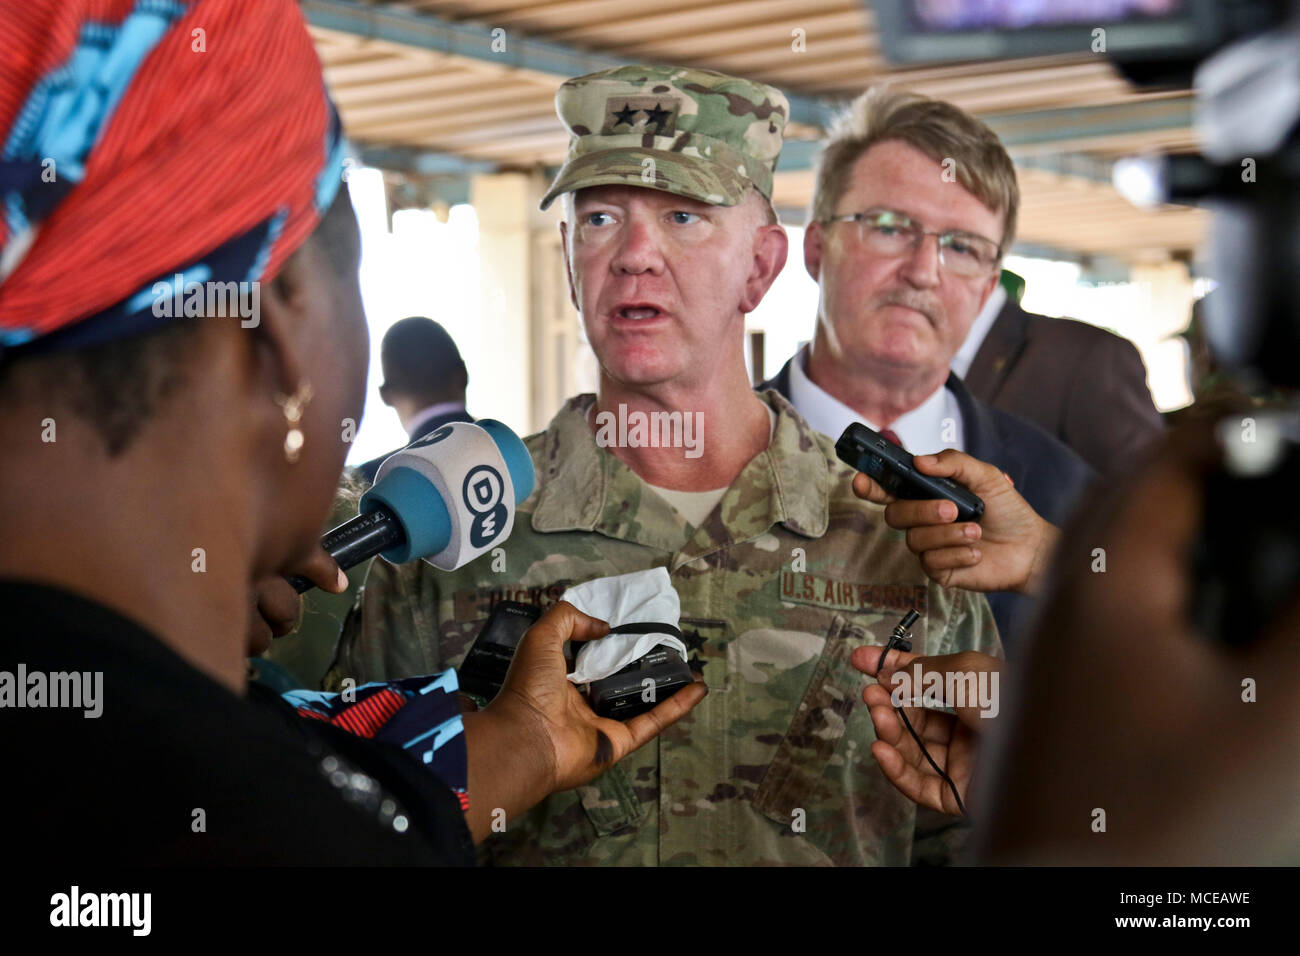 NIAMEY, Niger – U.S. Air Force Maj. Gen. Marcus Hicks, commander, Special Operations Command Africa, is interviewed by local media after the opening ceremony of Flintlock 2018 in Niamey, Niger, April 11, 2018. Flintlock, hosted by Niger, with key outstations at Burkina Faso and Senegal, is designed to strengthen the ability of key partner nations in the region to counter violent extremist organizations, protect their borders, and provide security for their people. (U.S. Army Photo by Sgt. Heather Doppke/79th Theater Sustainment Command) Stock Photo